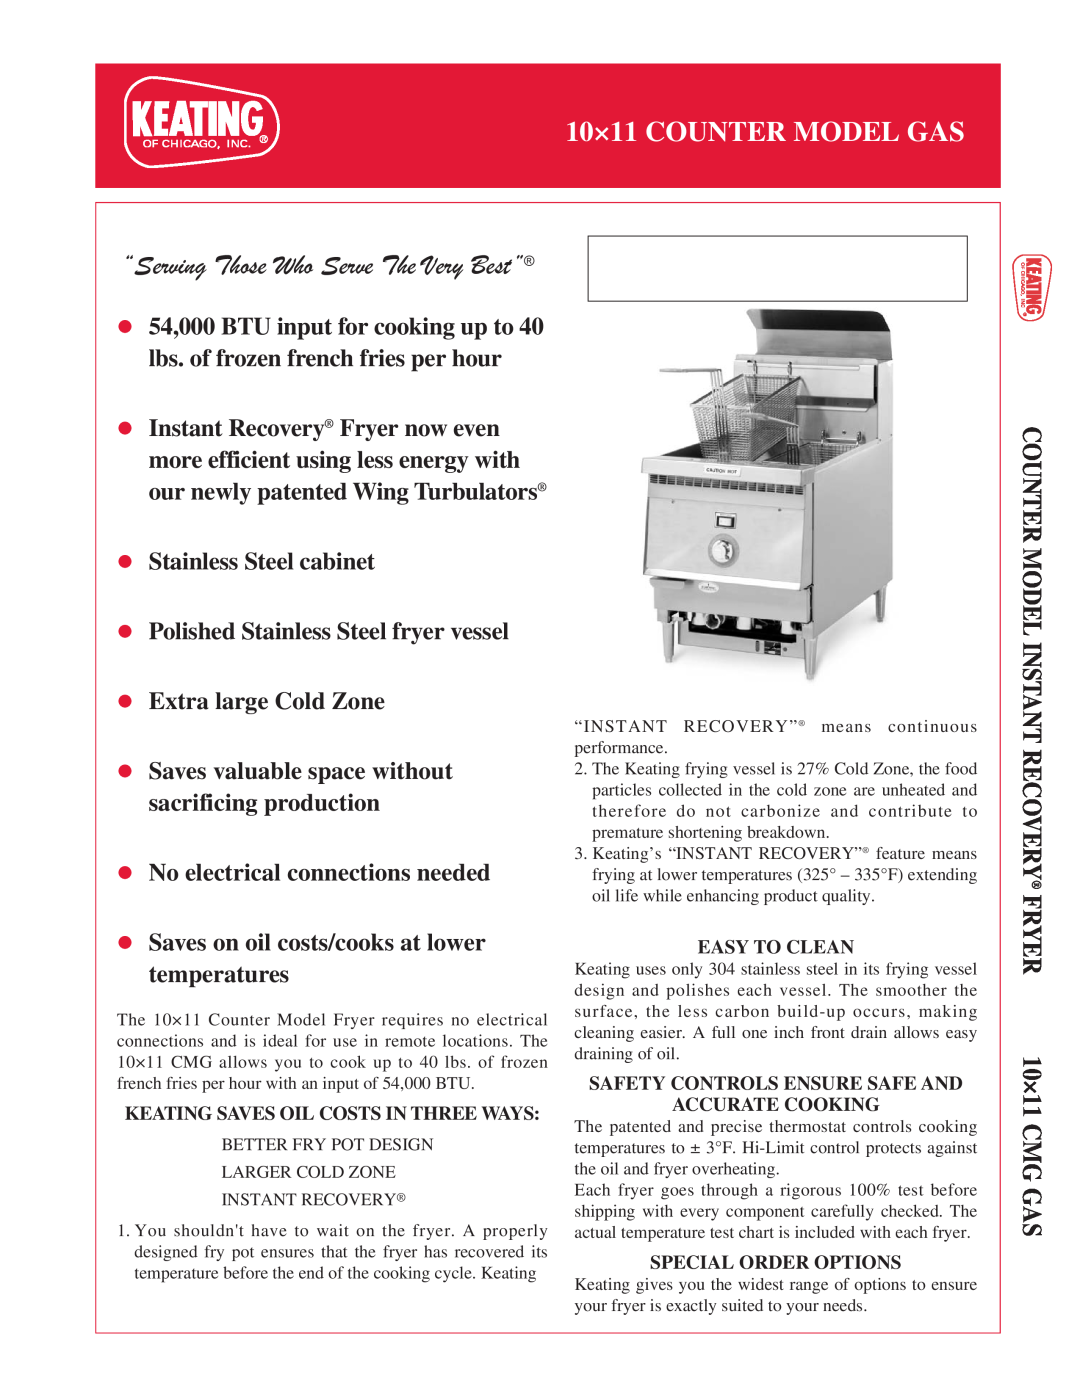 Keating Of Chicago 1011 manual 10×11 COUNTER MODEL GAS, “Serving Those Who Serve The Very Best”, Stainless Steel cabinet 